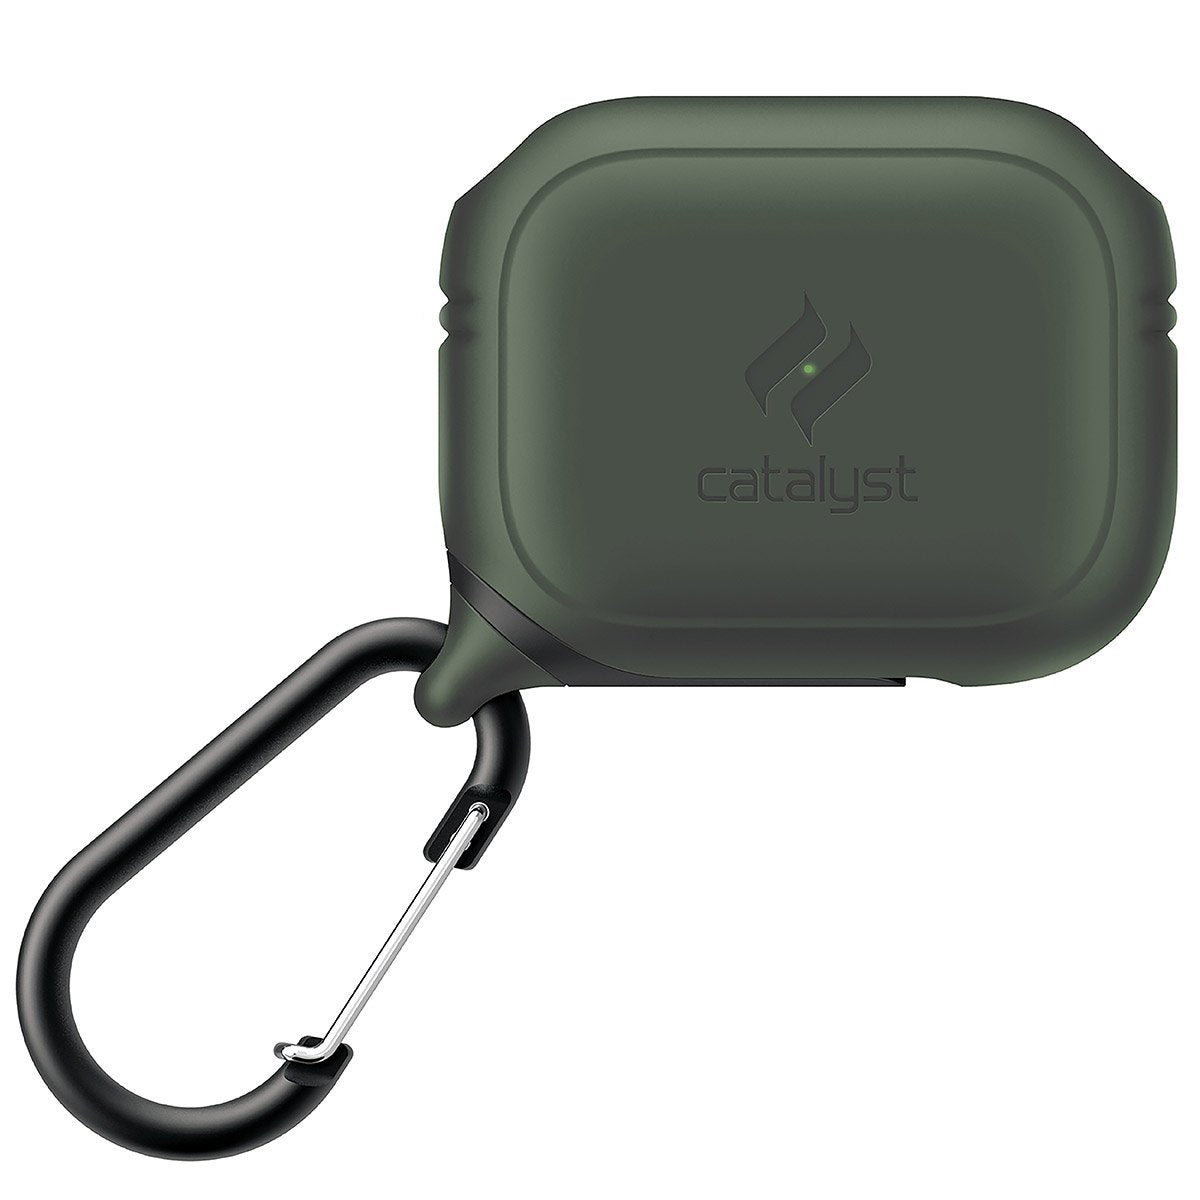 CATAPDPROGRN | catalyst airpods pro gen 2 1 waterproof case carabiner army green front view